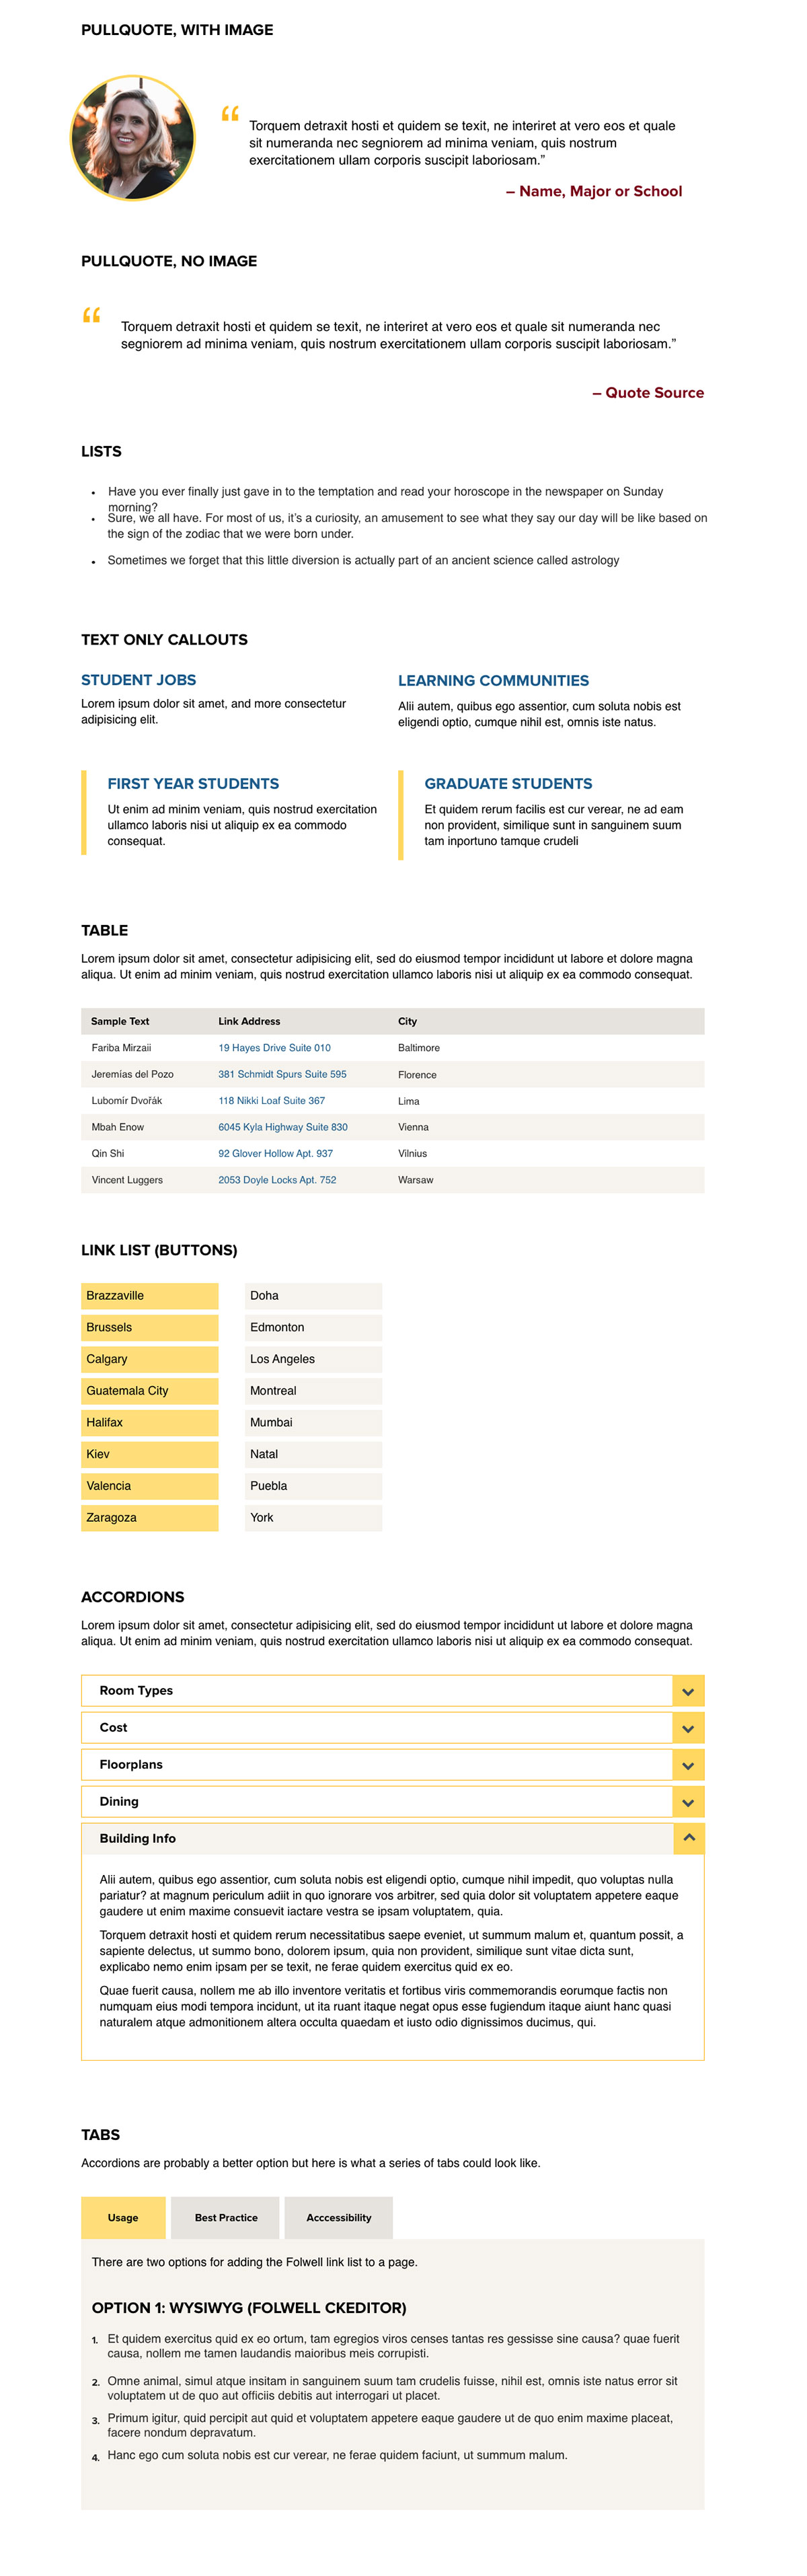 sample family of components designed for the website